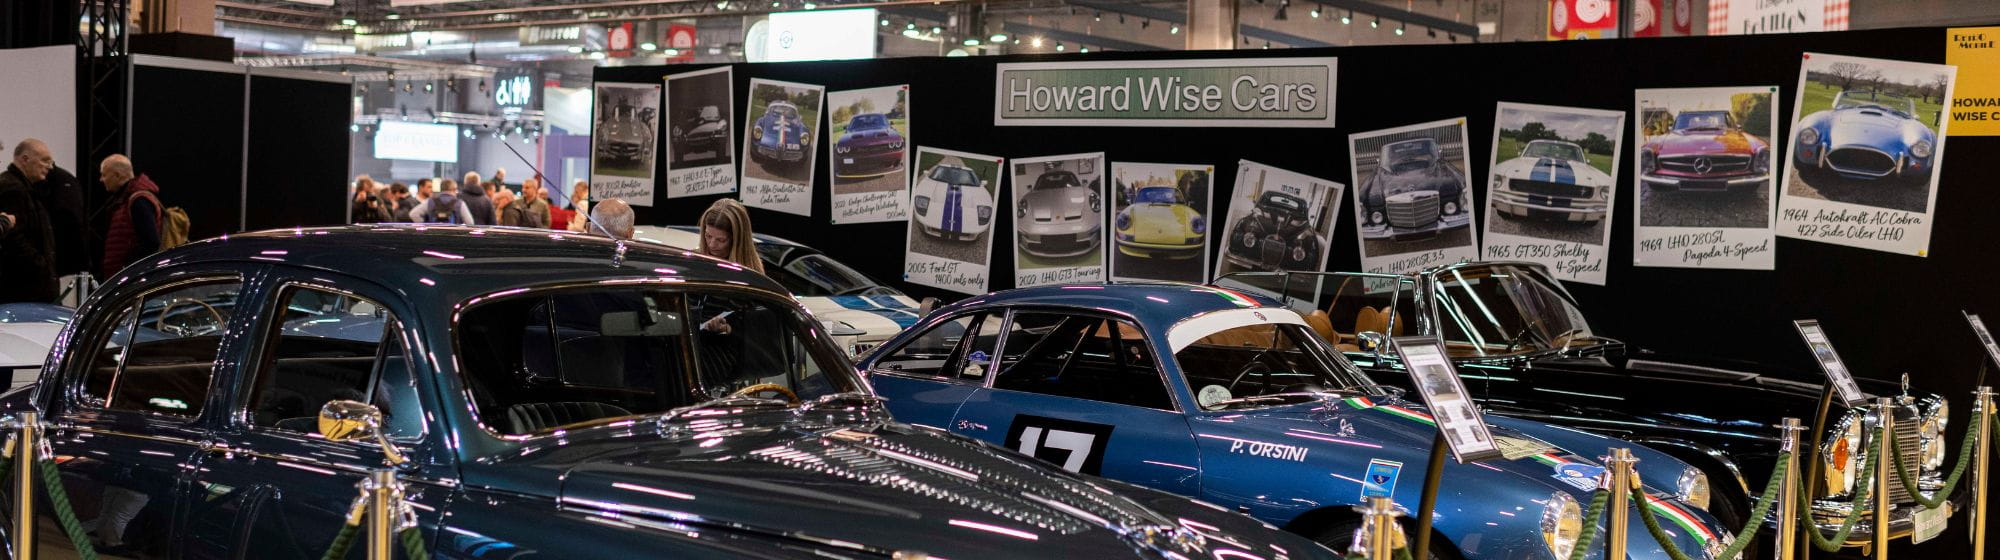 Howard Wise Cars in shades of blue at the Retromobile show